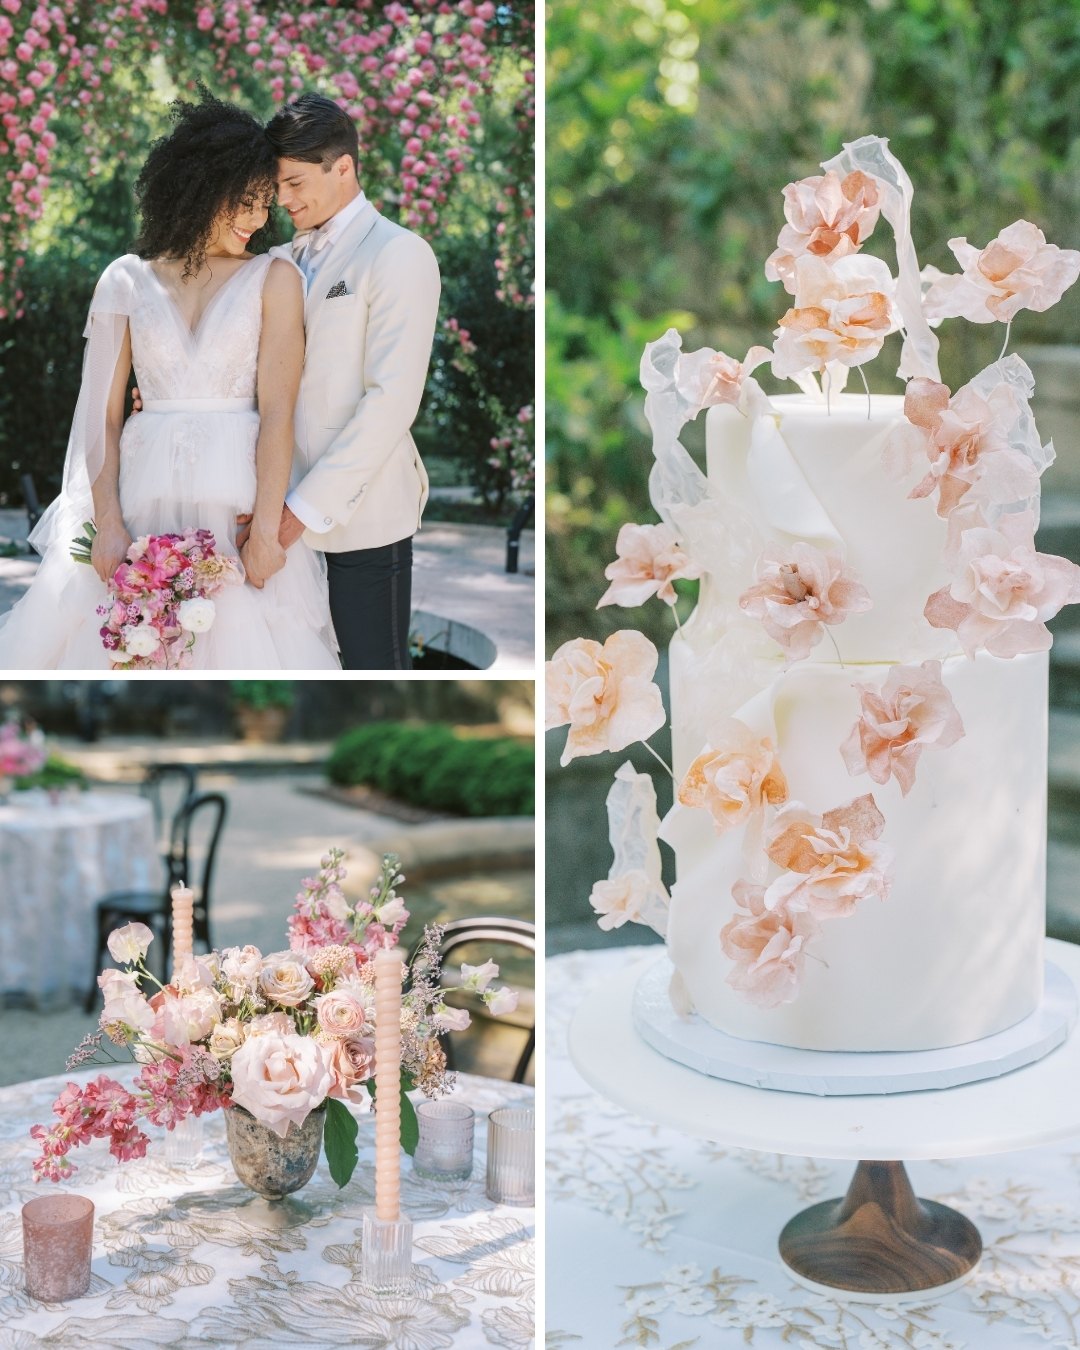 Collage of images of wedding couple, wedding cake and rose centerpieces